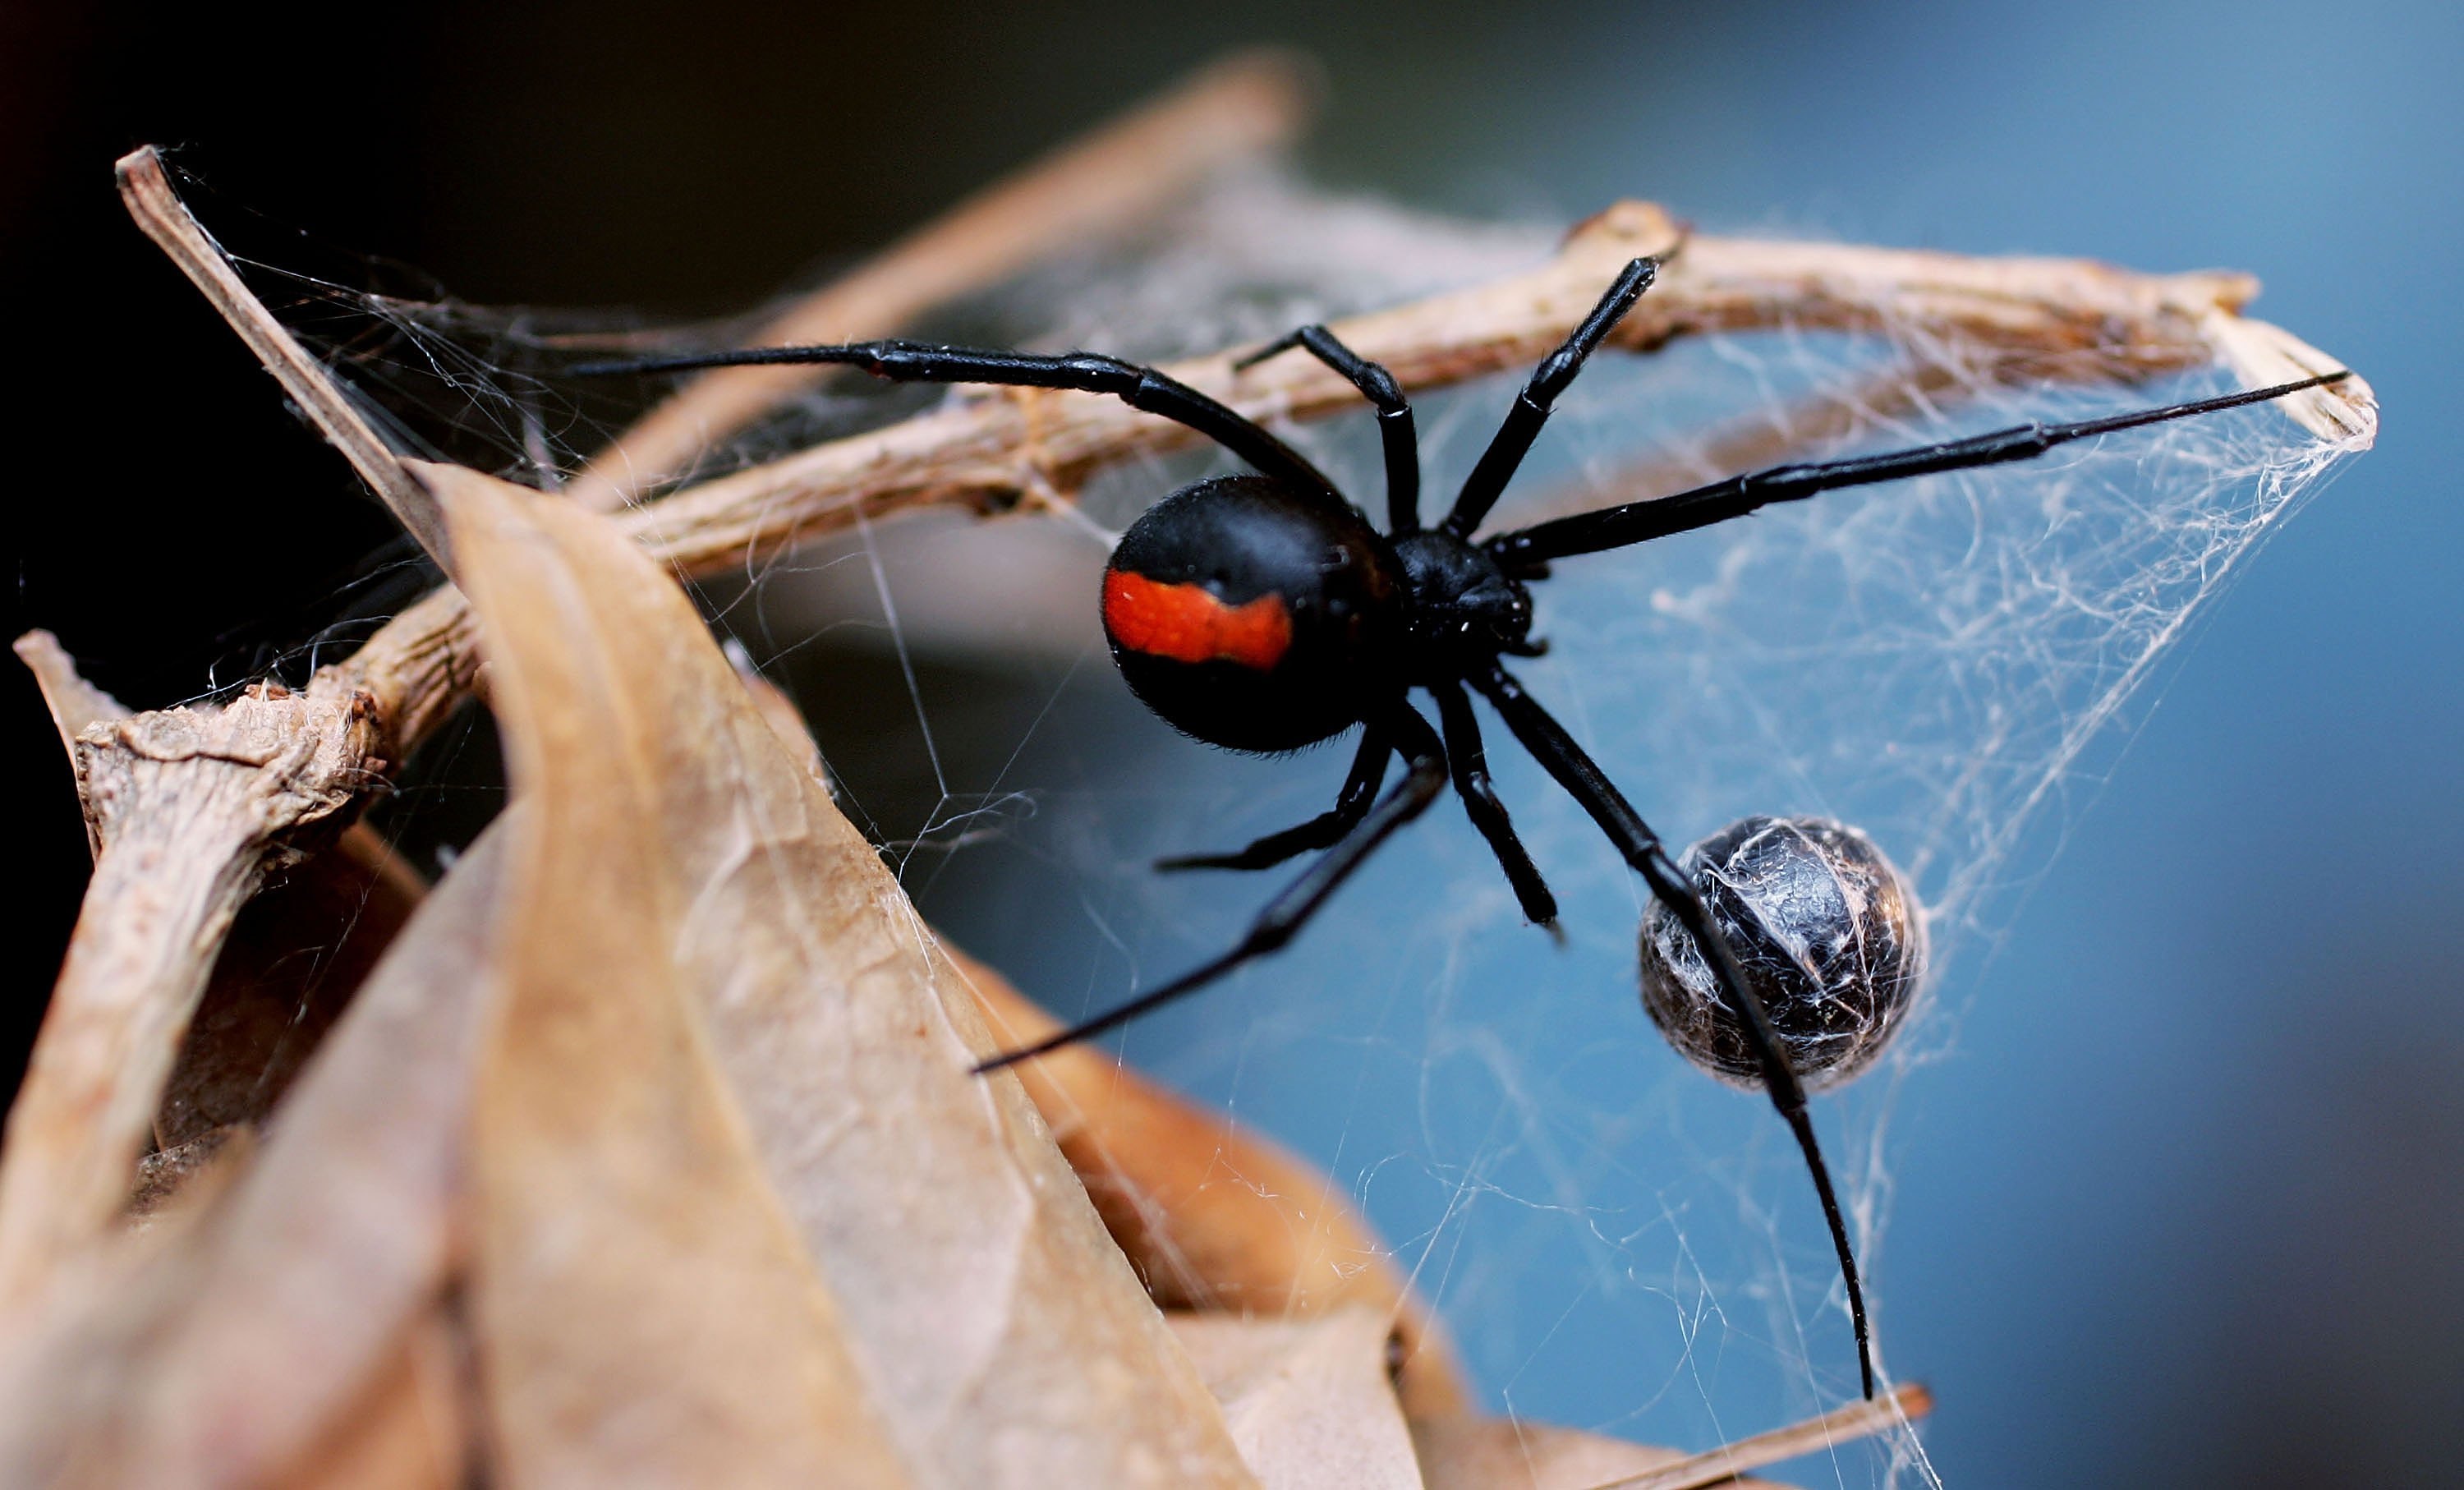 What Makes Black Widows So Deadly